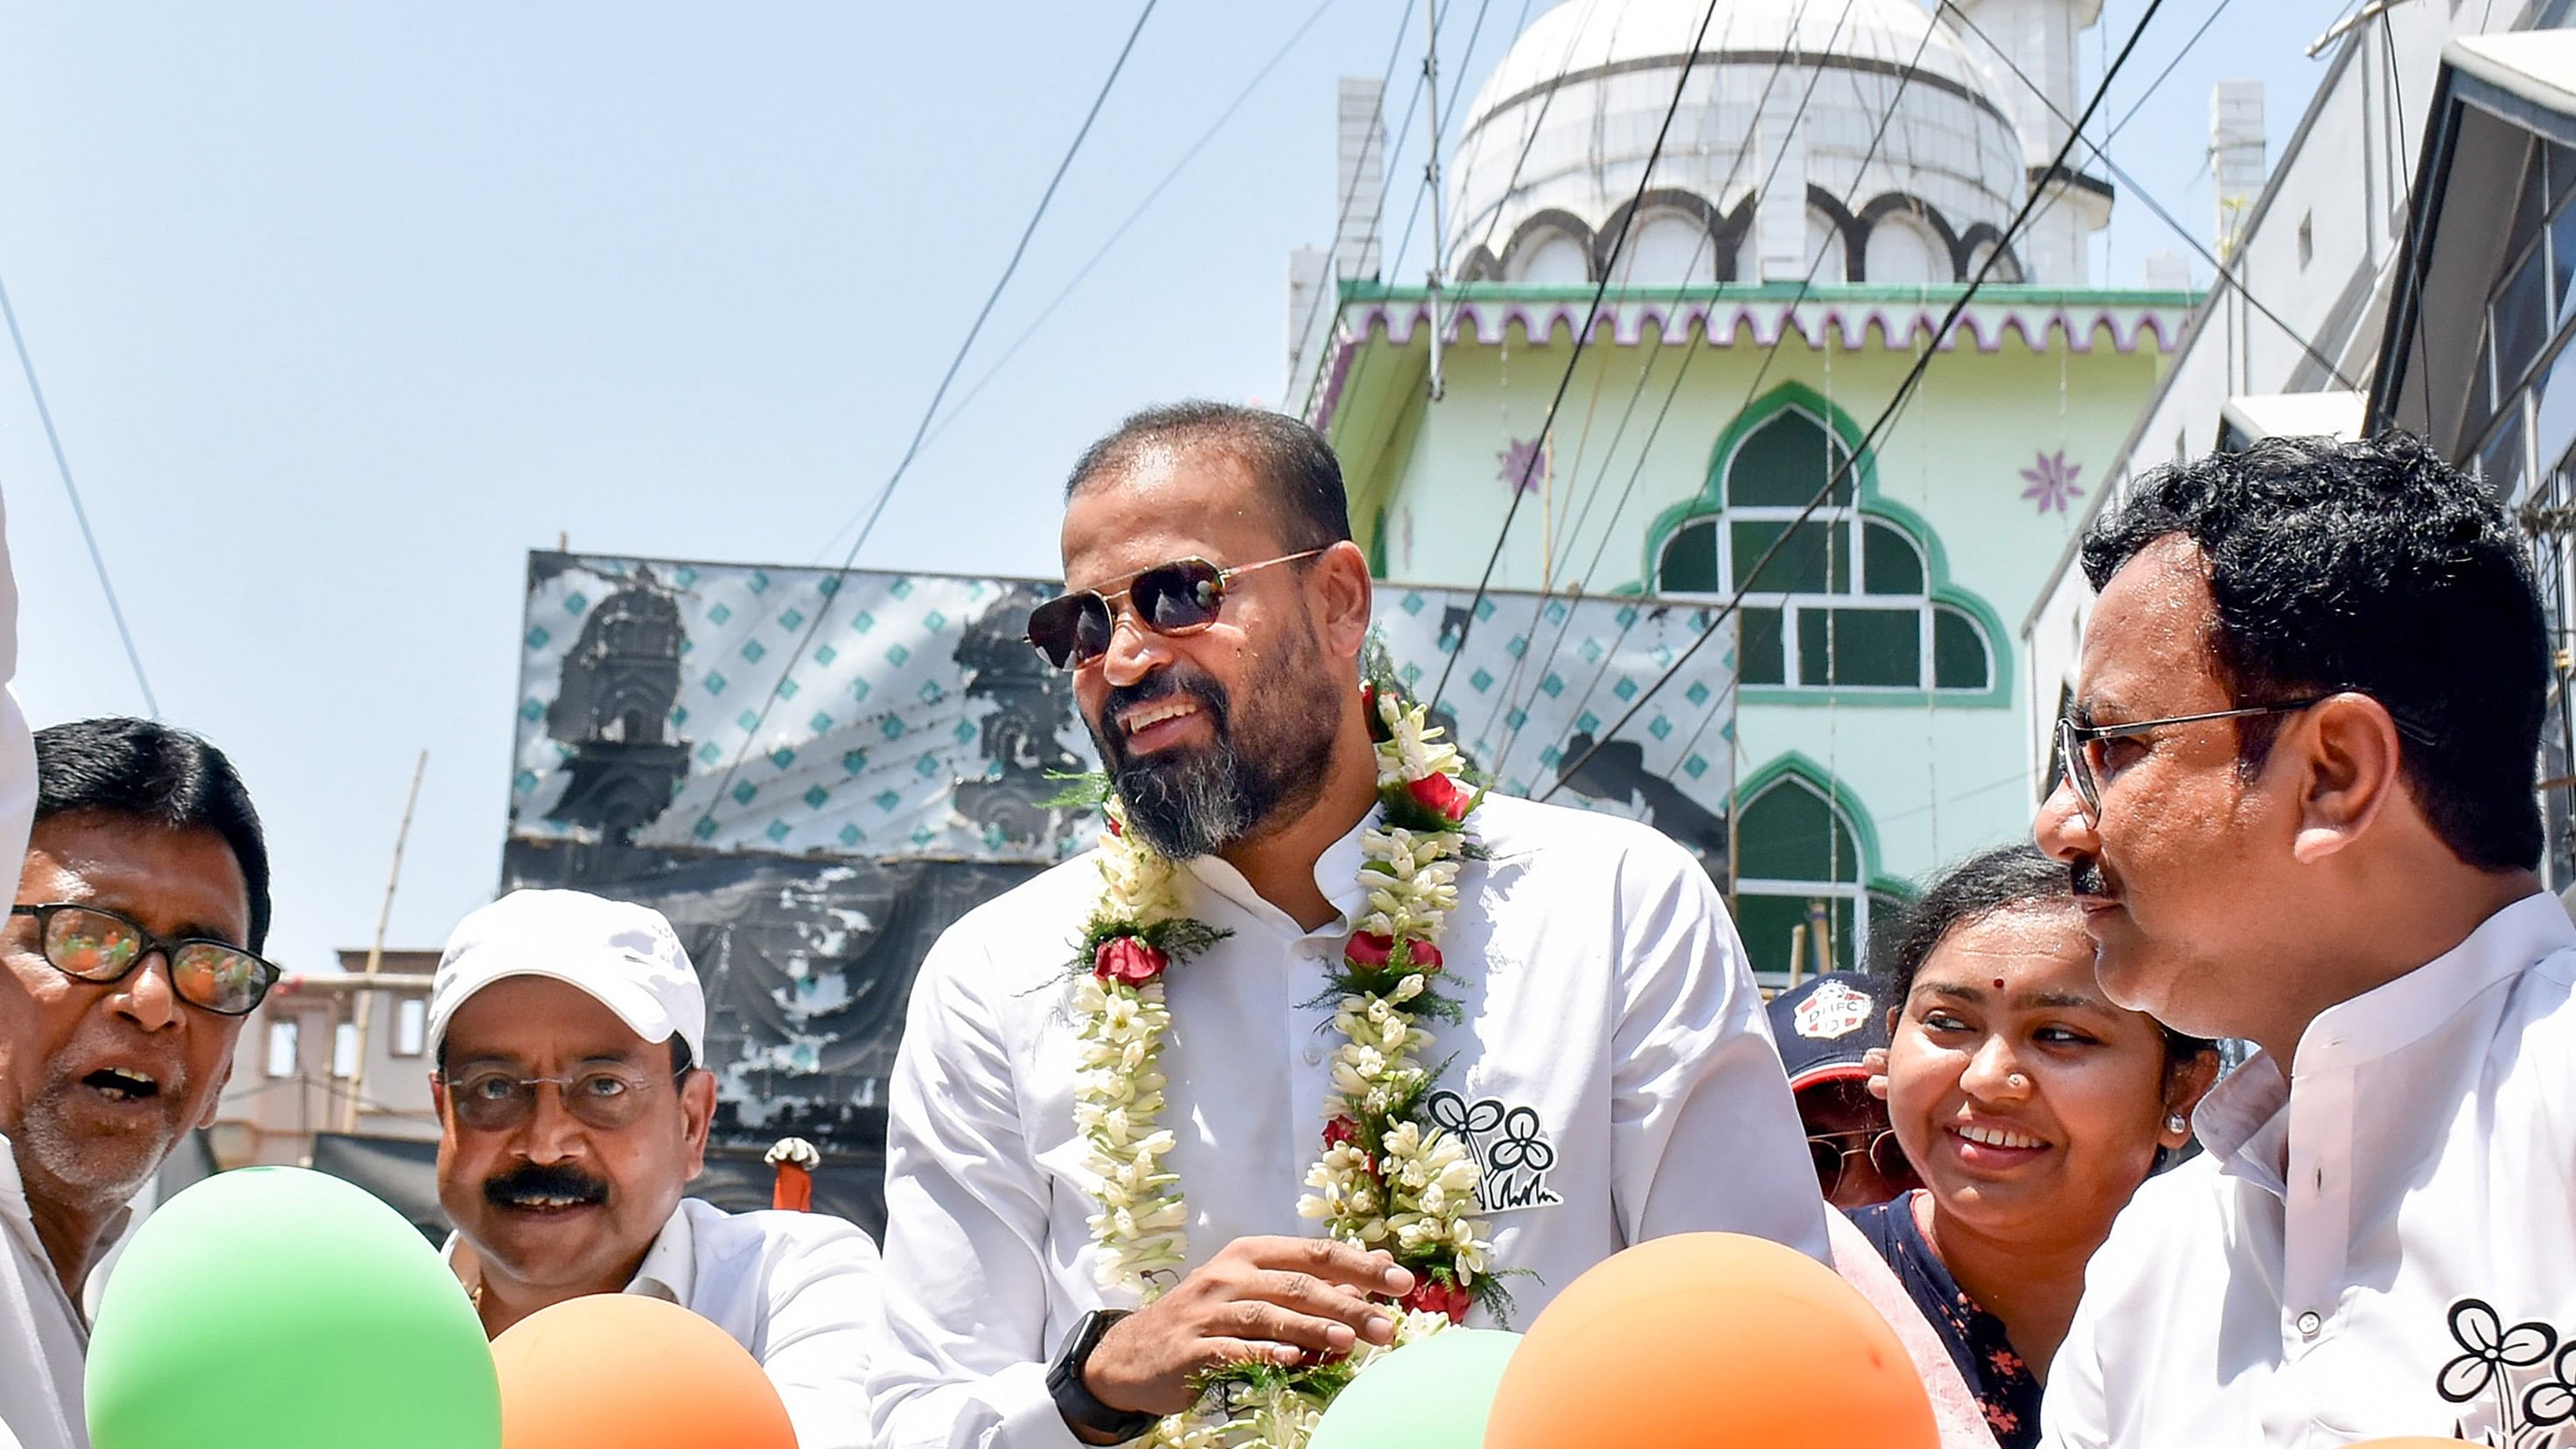 <div class="paragraphs"><p>Former cricketer and TMC candidate Yusuf Pathan during his election campaign ahead of the Lok Sabha election at Beldanga in Murshidabad district of West Bengal.</p></div>